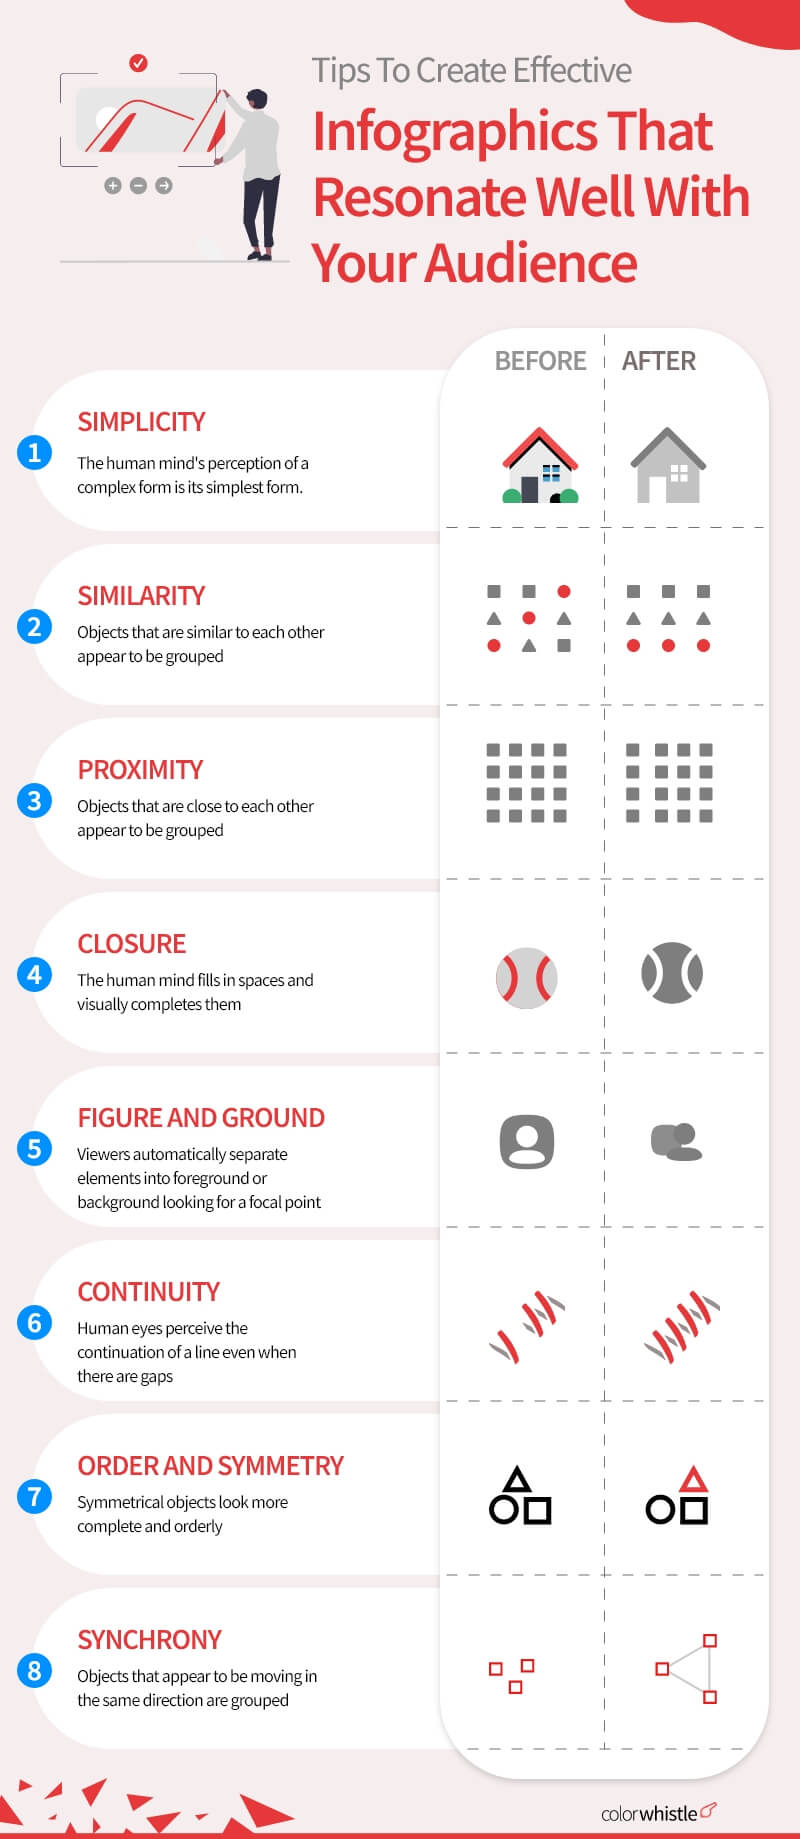 How to Communicate Effectively via Infographics (Tips To Create Effective)- ColorWhistle